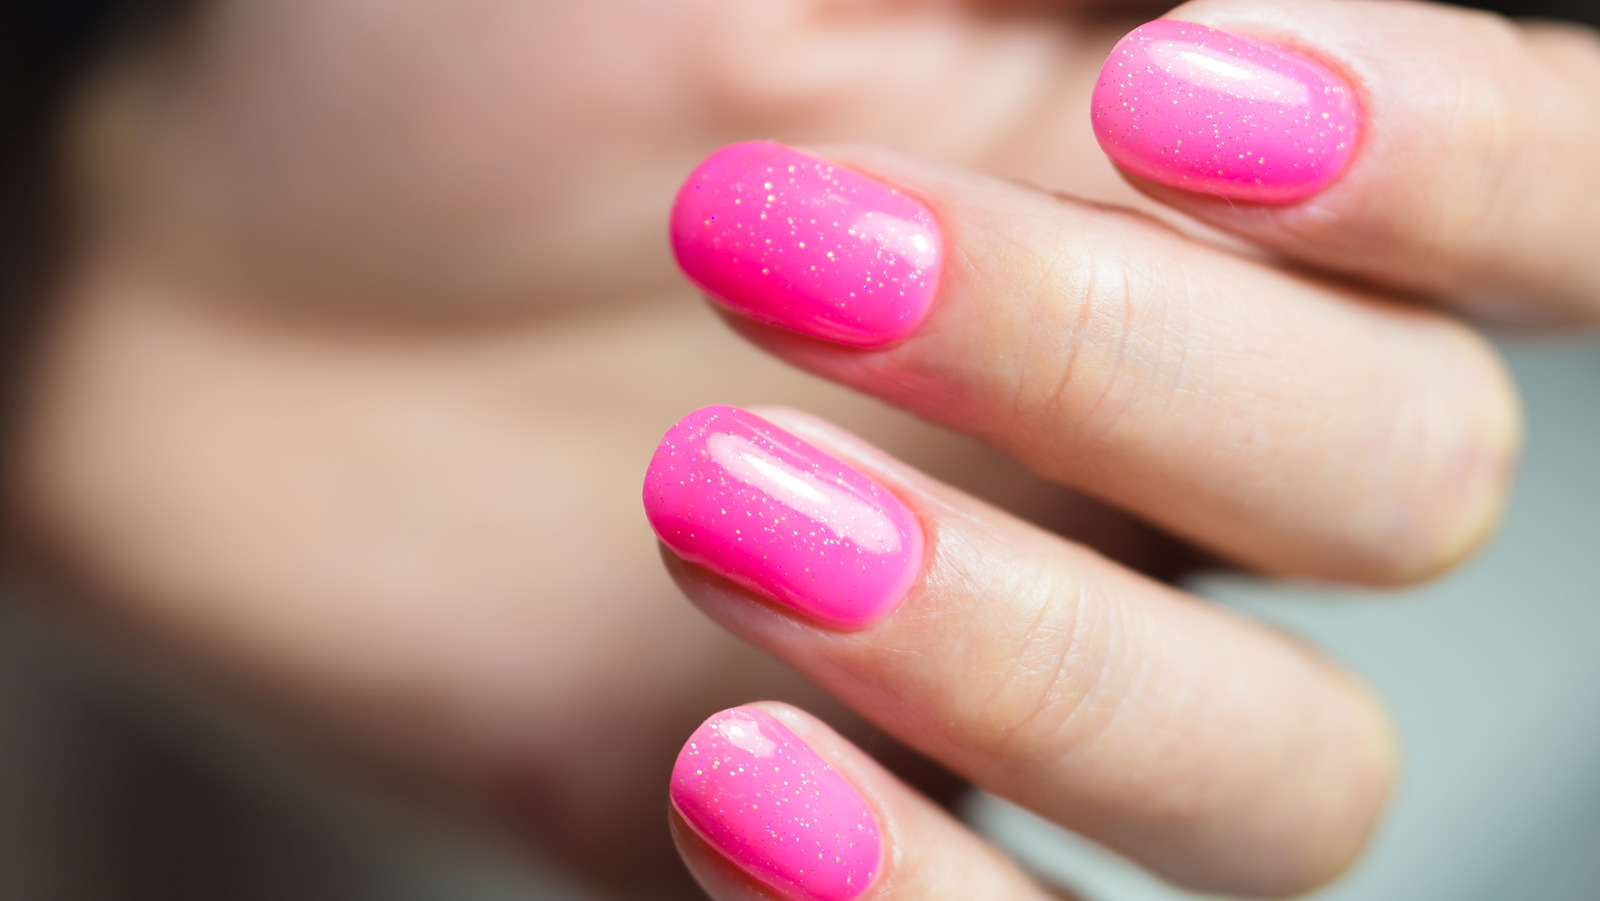 Barbiecore is trending: Here are the hottest pink nail designs – Scratch